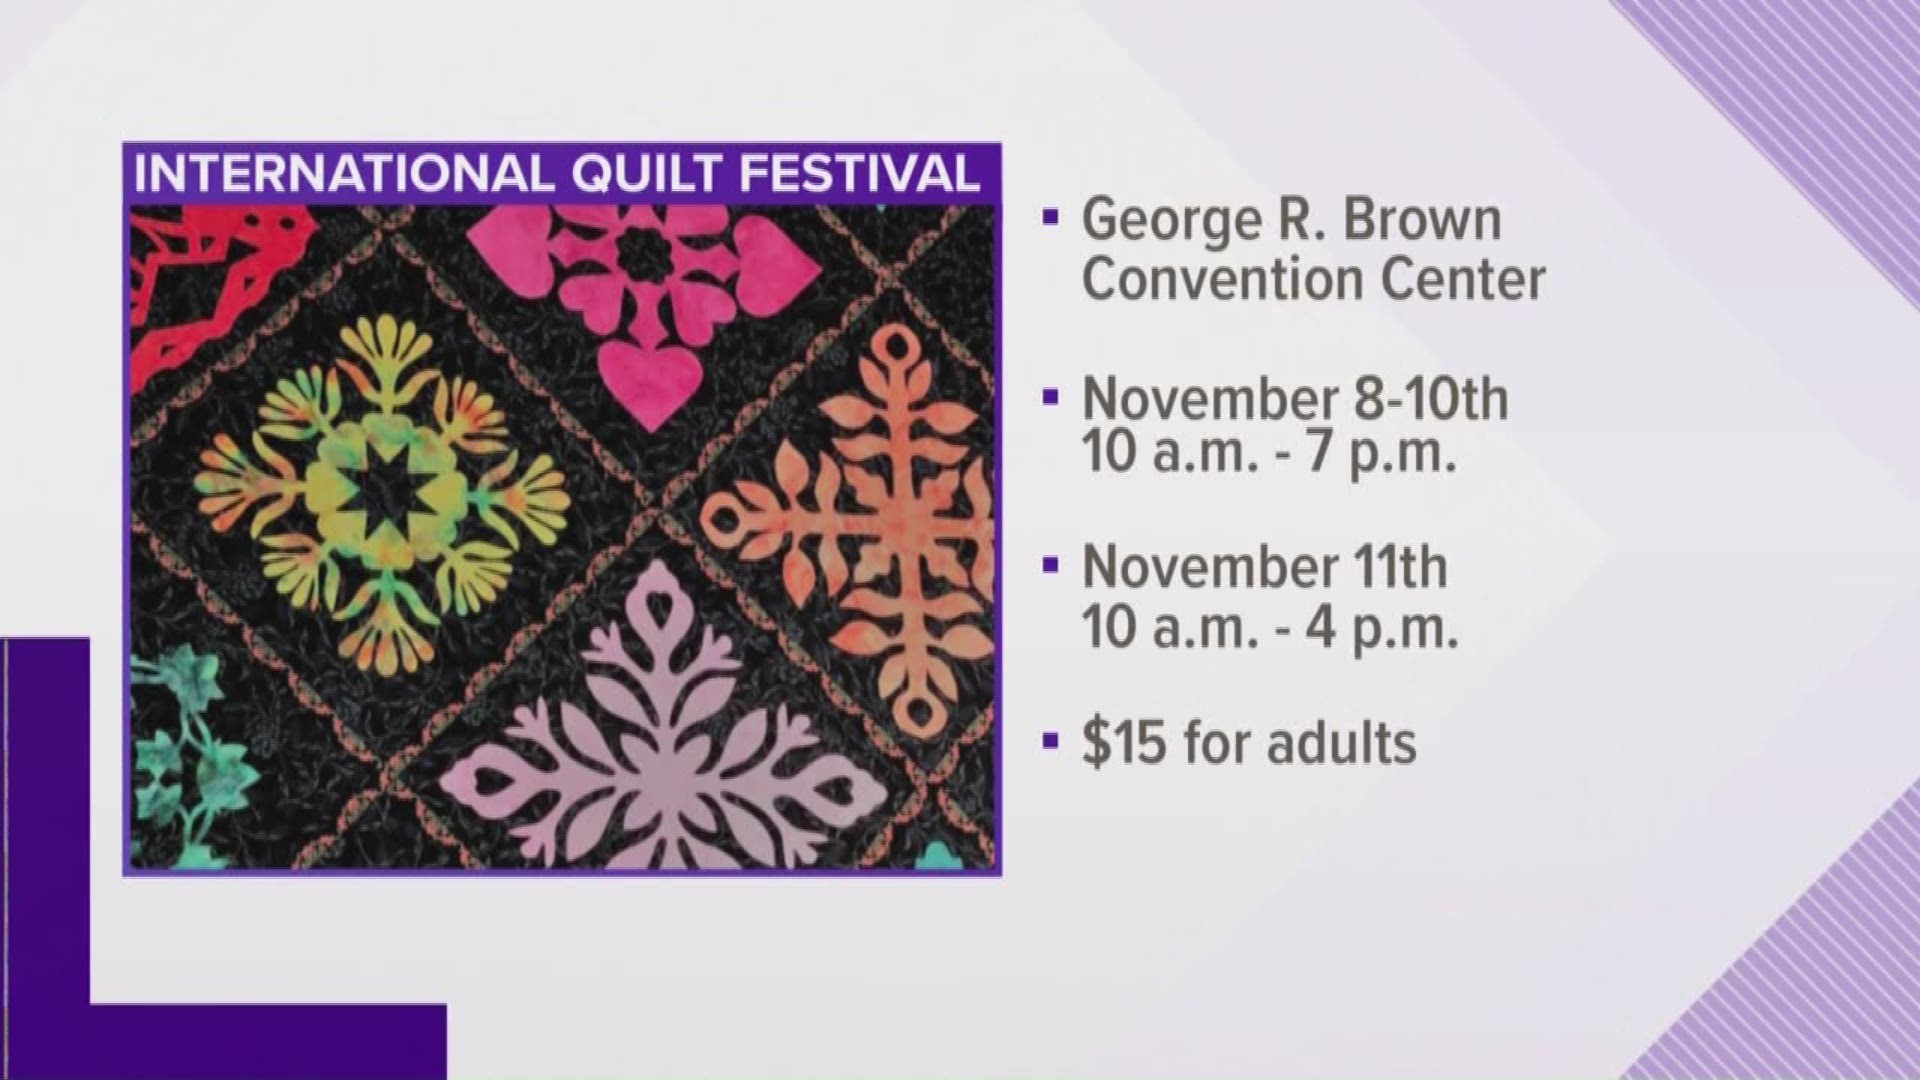 KHOU 11 Meteorologist Blake Mathews is live at the International Quilt Festival that kicked off Thursday at the GRB Convention Center.